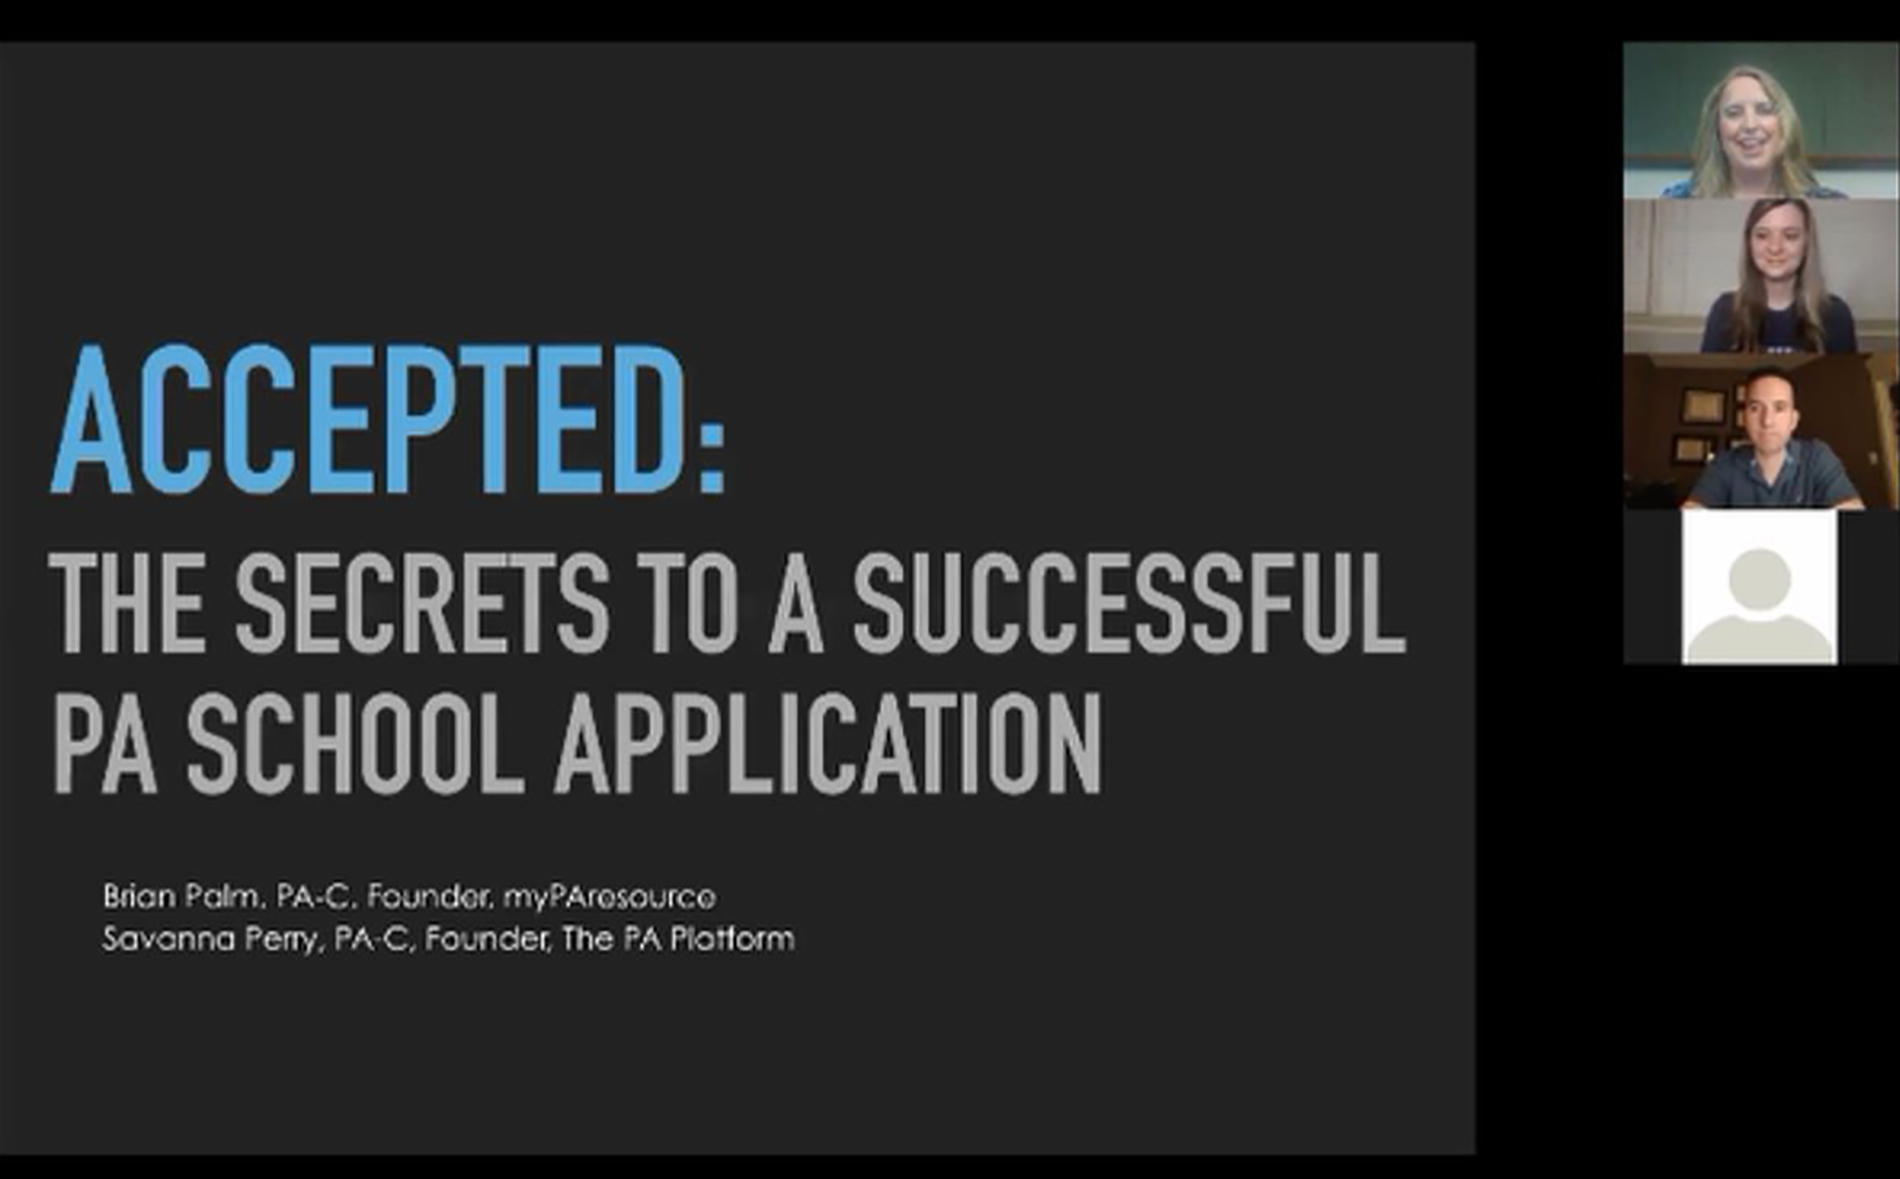 Pictures of people alongside "Accepted: The Secrets to a Successful PA School Application"